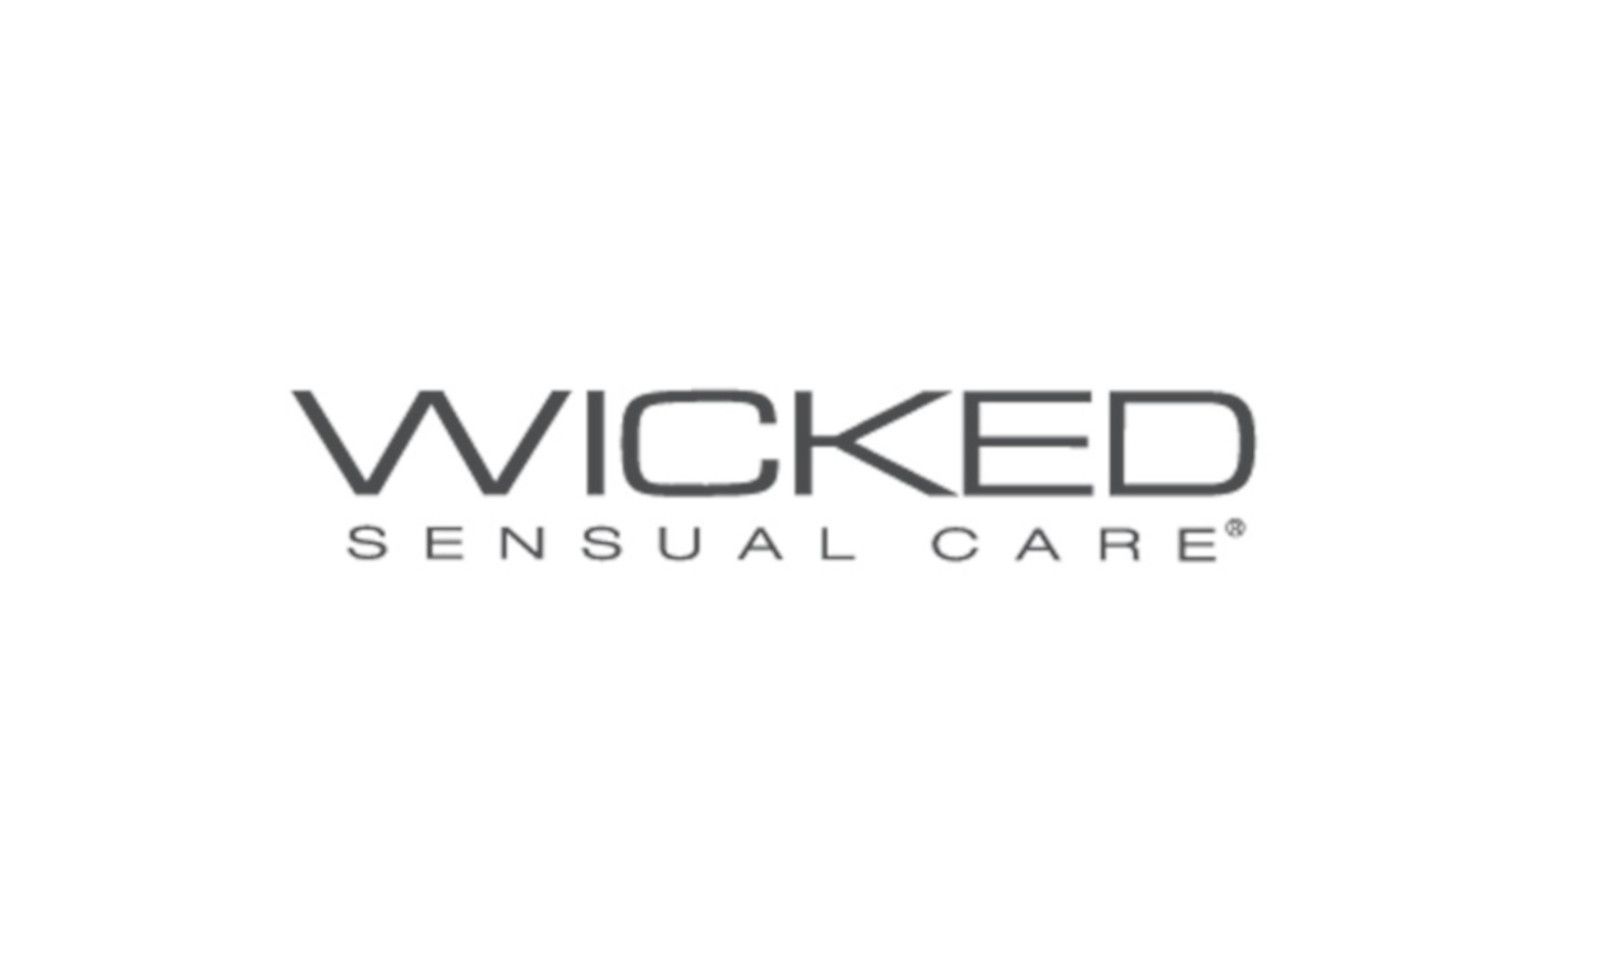 Wicked Sensual Care Named Best Enhancement Company at AVN Awards